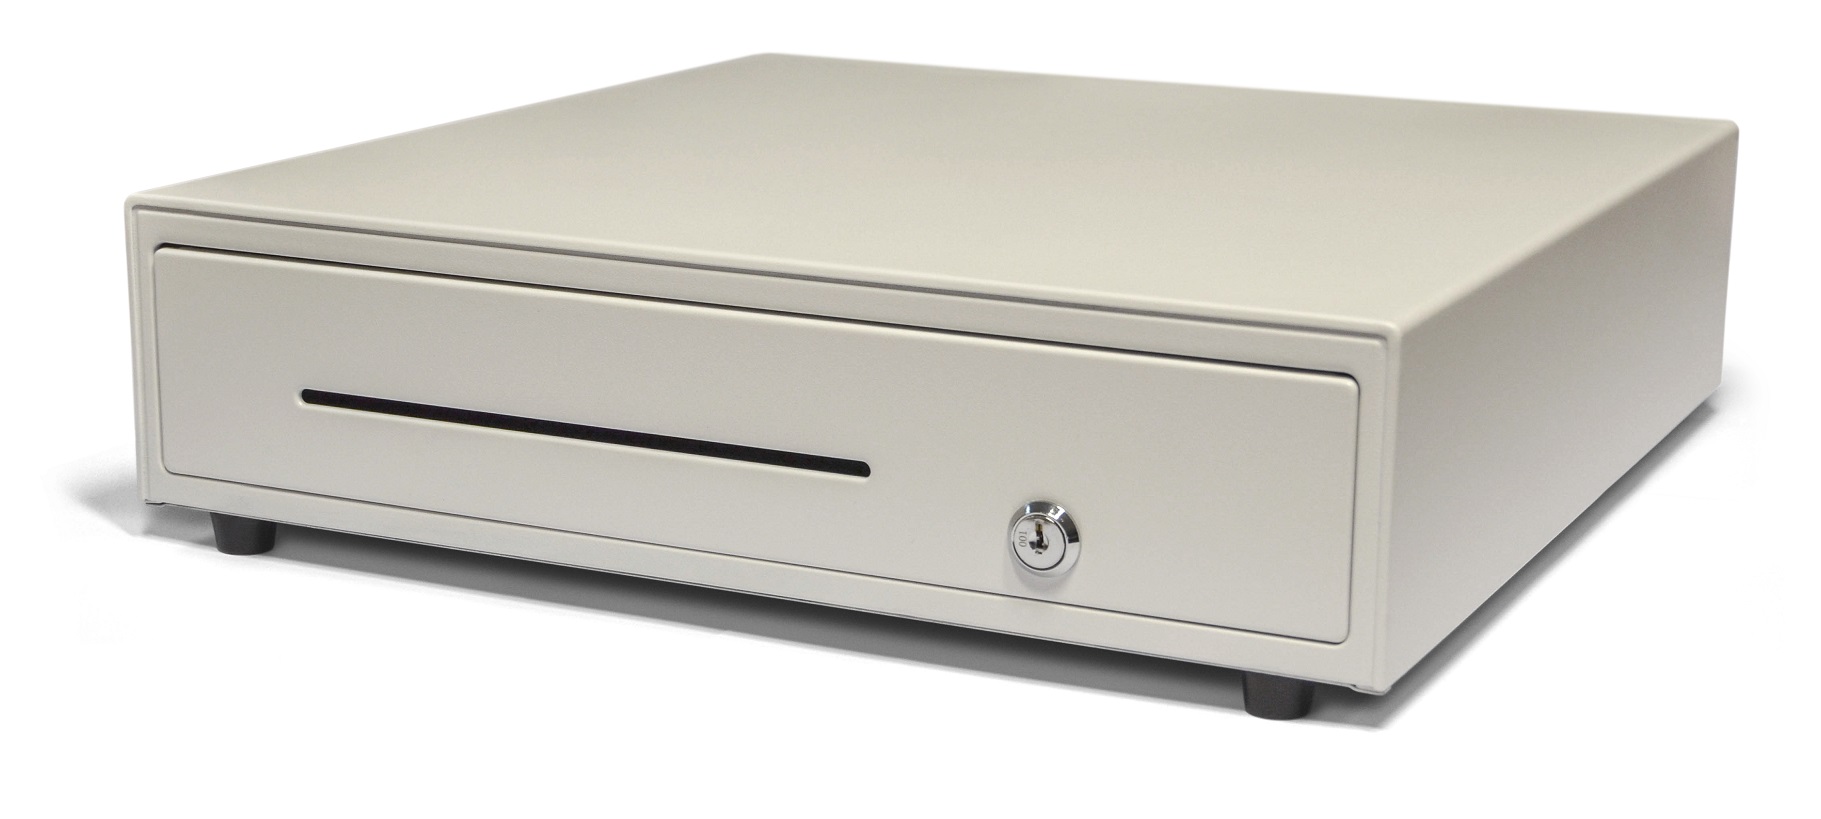 Security cash drawer